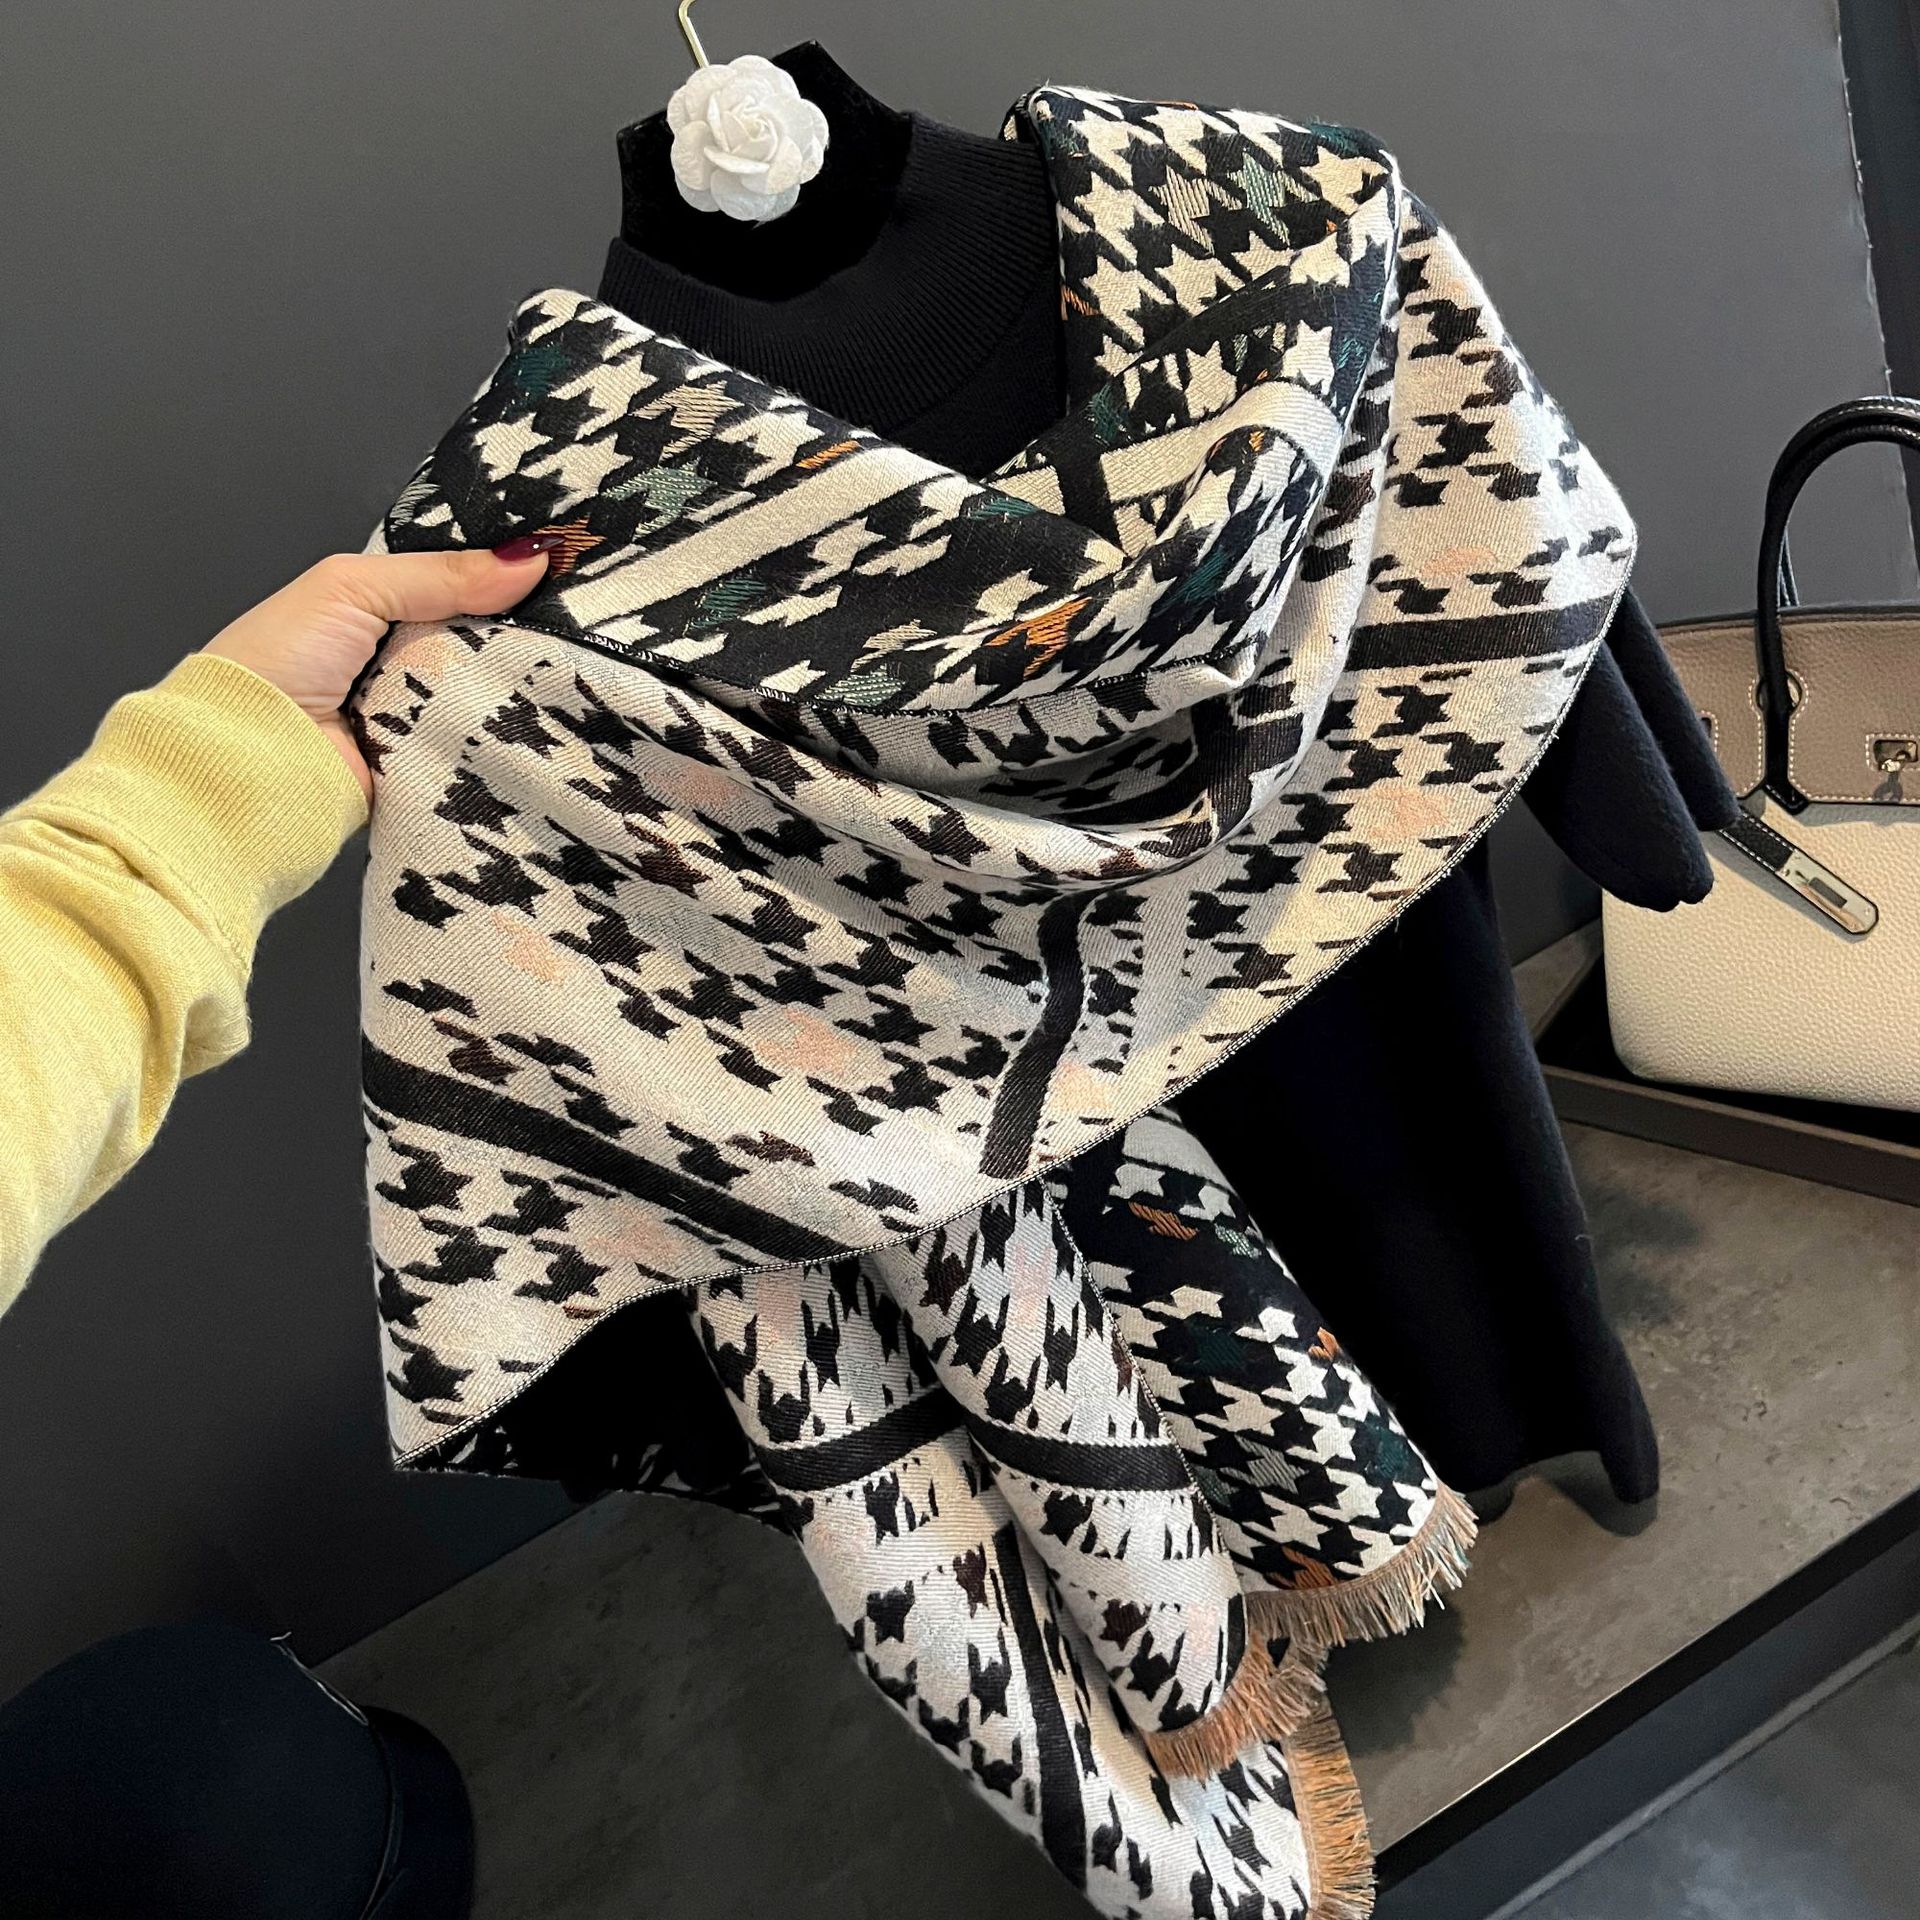 Houndstooth Scarf Women's Autumn and Winter Cashmere-like Printed Thickening Thermal Fashion Talma Mid-Length Scarf